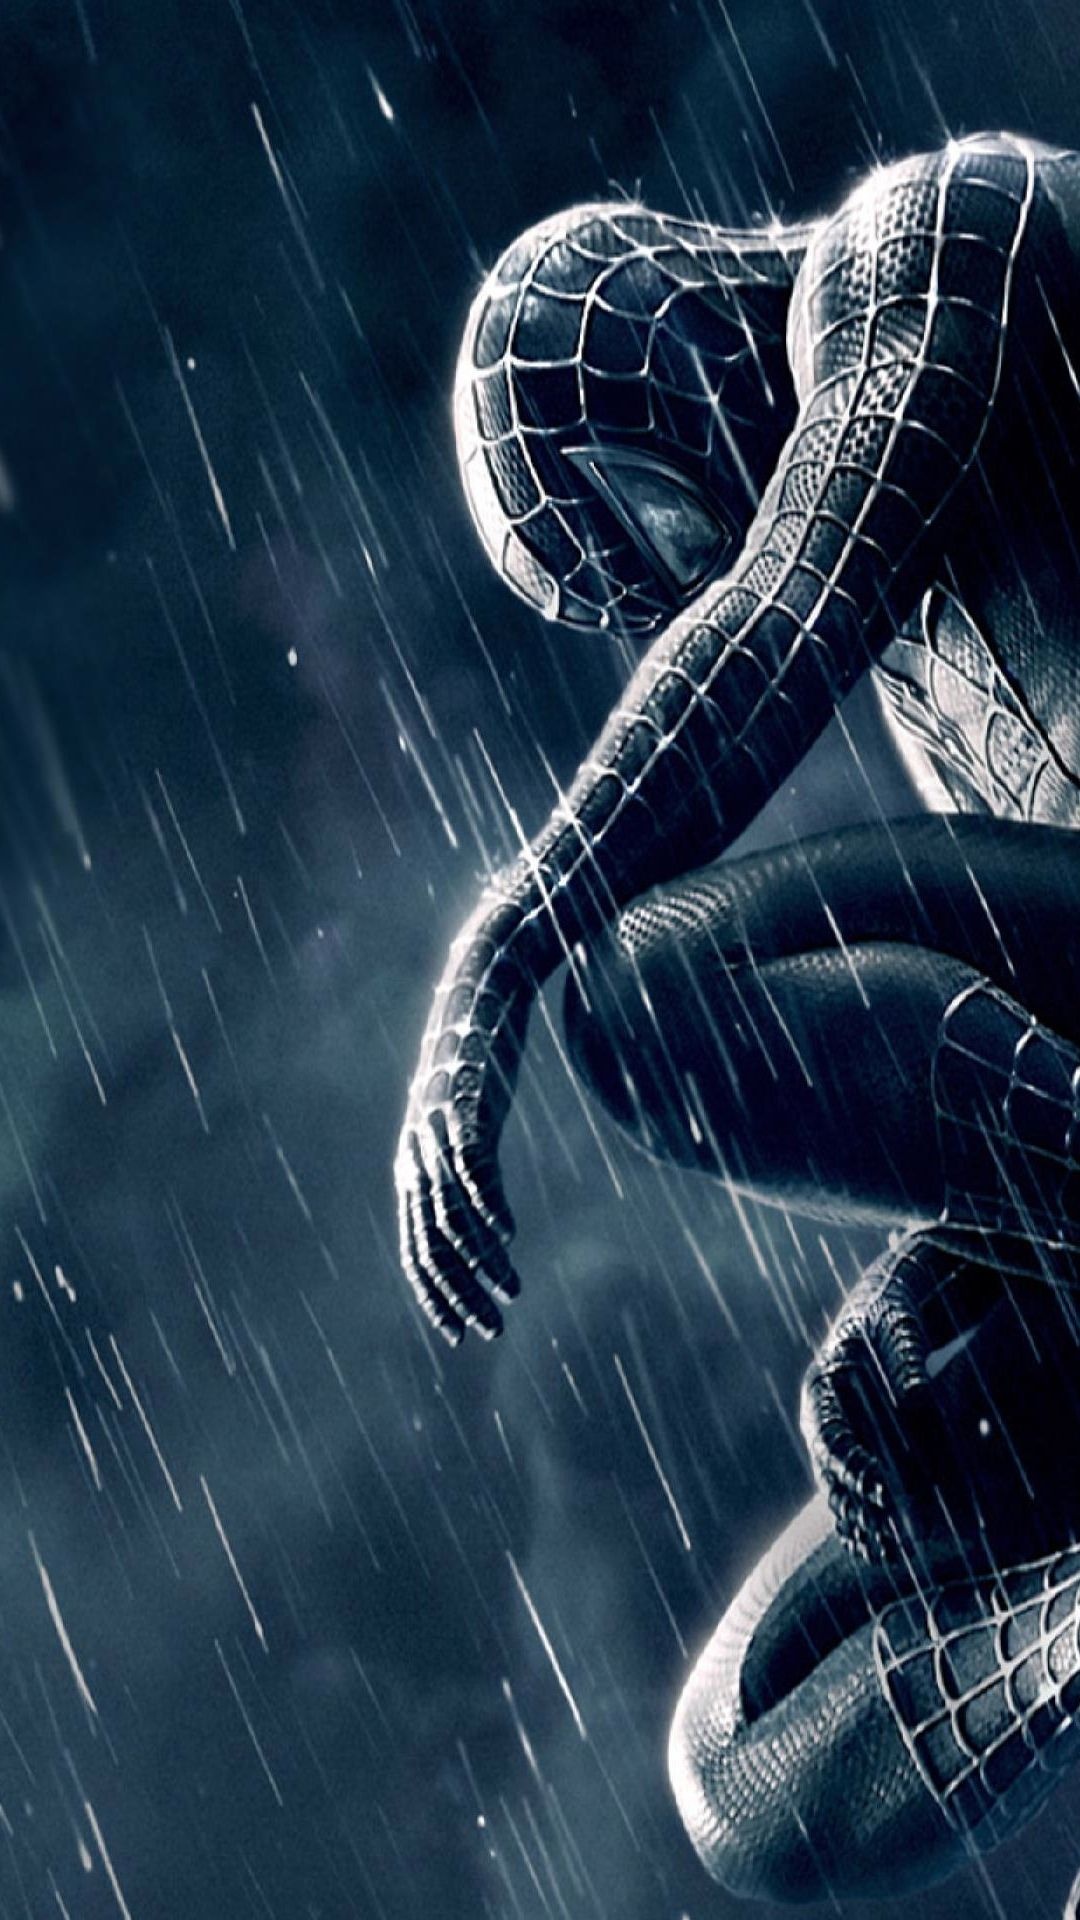 HD wallpaper, Amazing Spider Man, Phone Full Hd Spider Man Tobey Maguire Wallpaper, Cinematic Visuals, Spiderman 3, 1080X1920 Full Hd Phone, Black And Blue Wallpaper